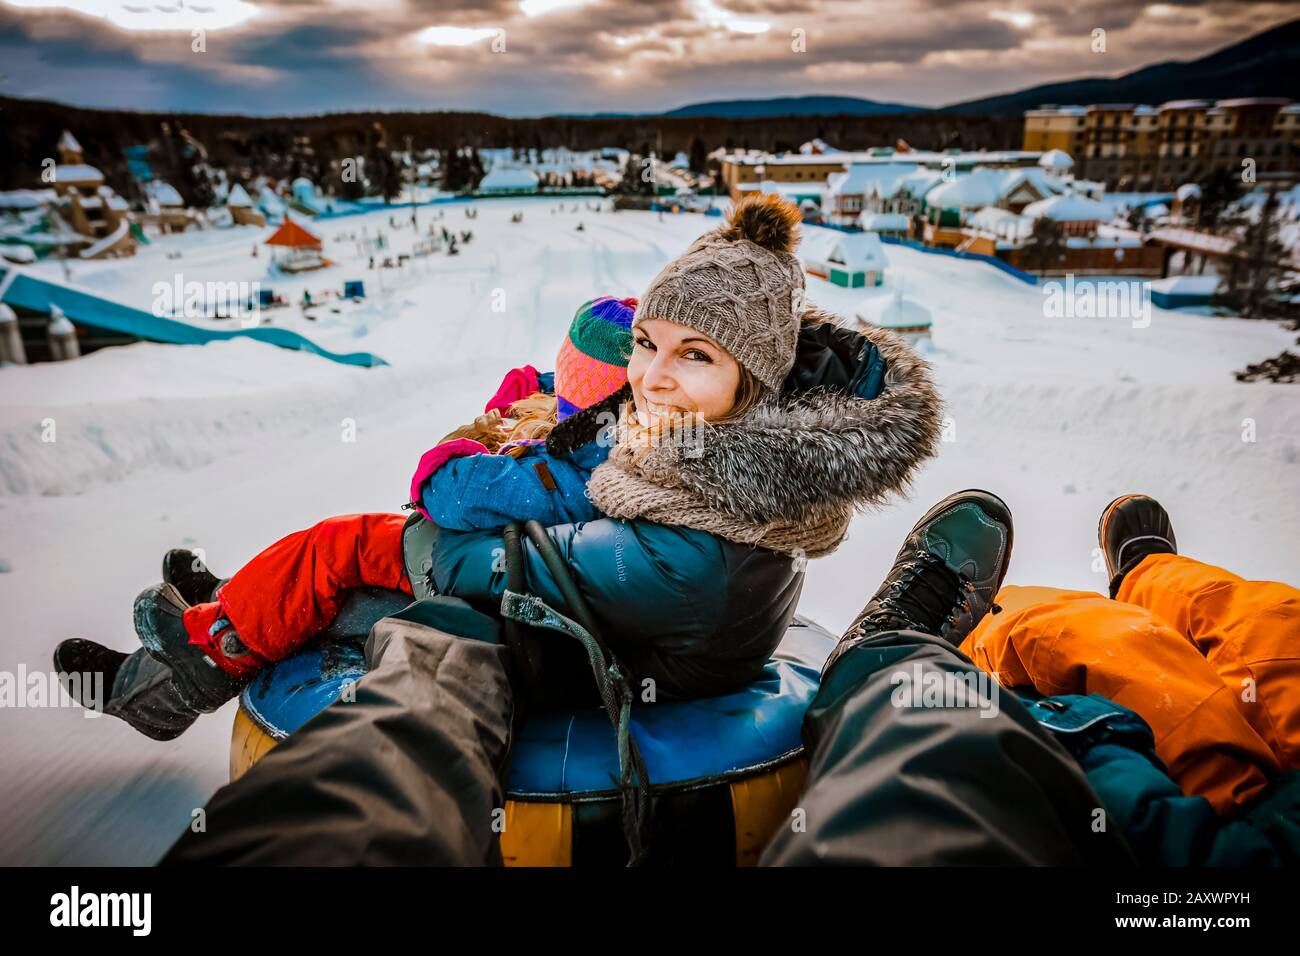 Mother sliding with her family on tubes during a winter day Stock Photo